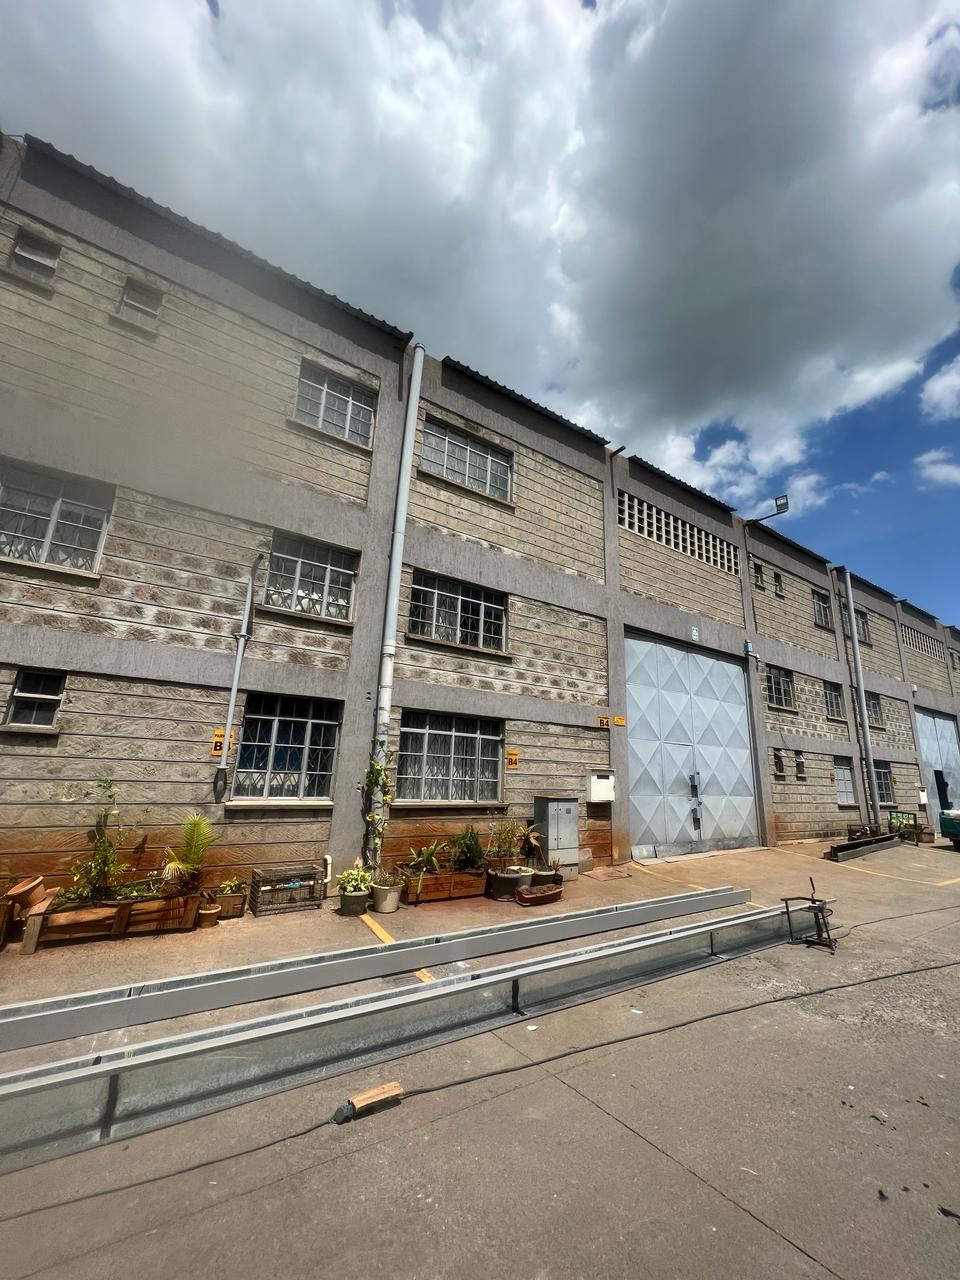 Spaciouse Warehouse For Sale in Mombasa Road. The Property has an Area size of 9000 Sq Ft. Asking Price: 58 M. Musilli Homes.